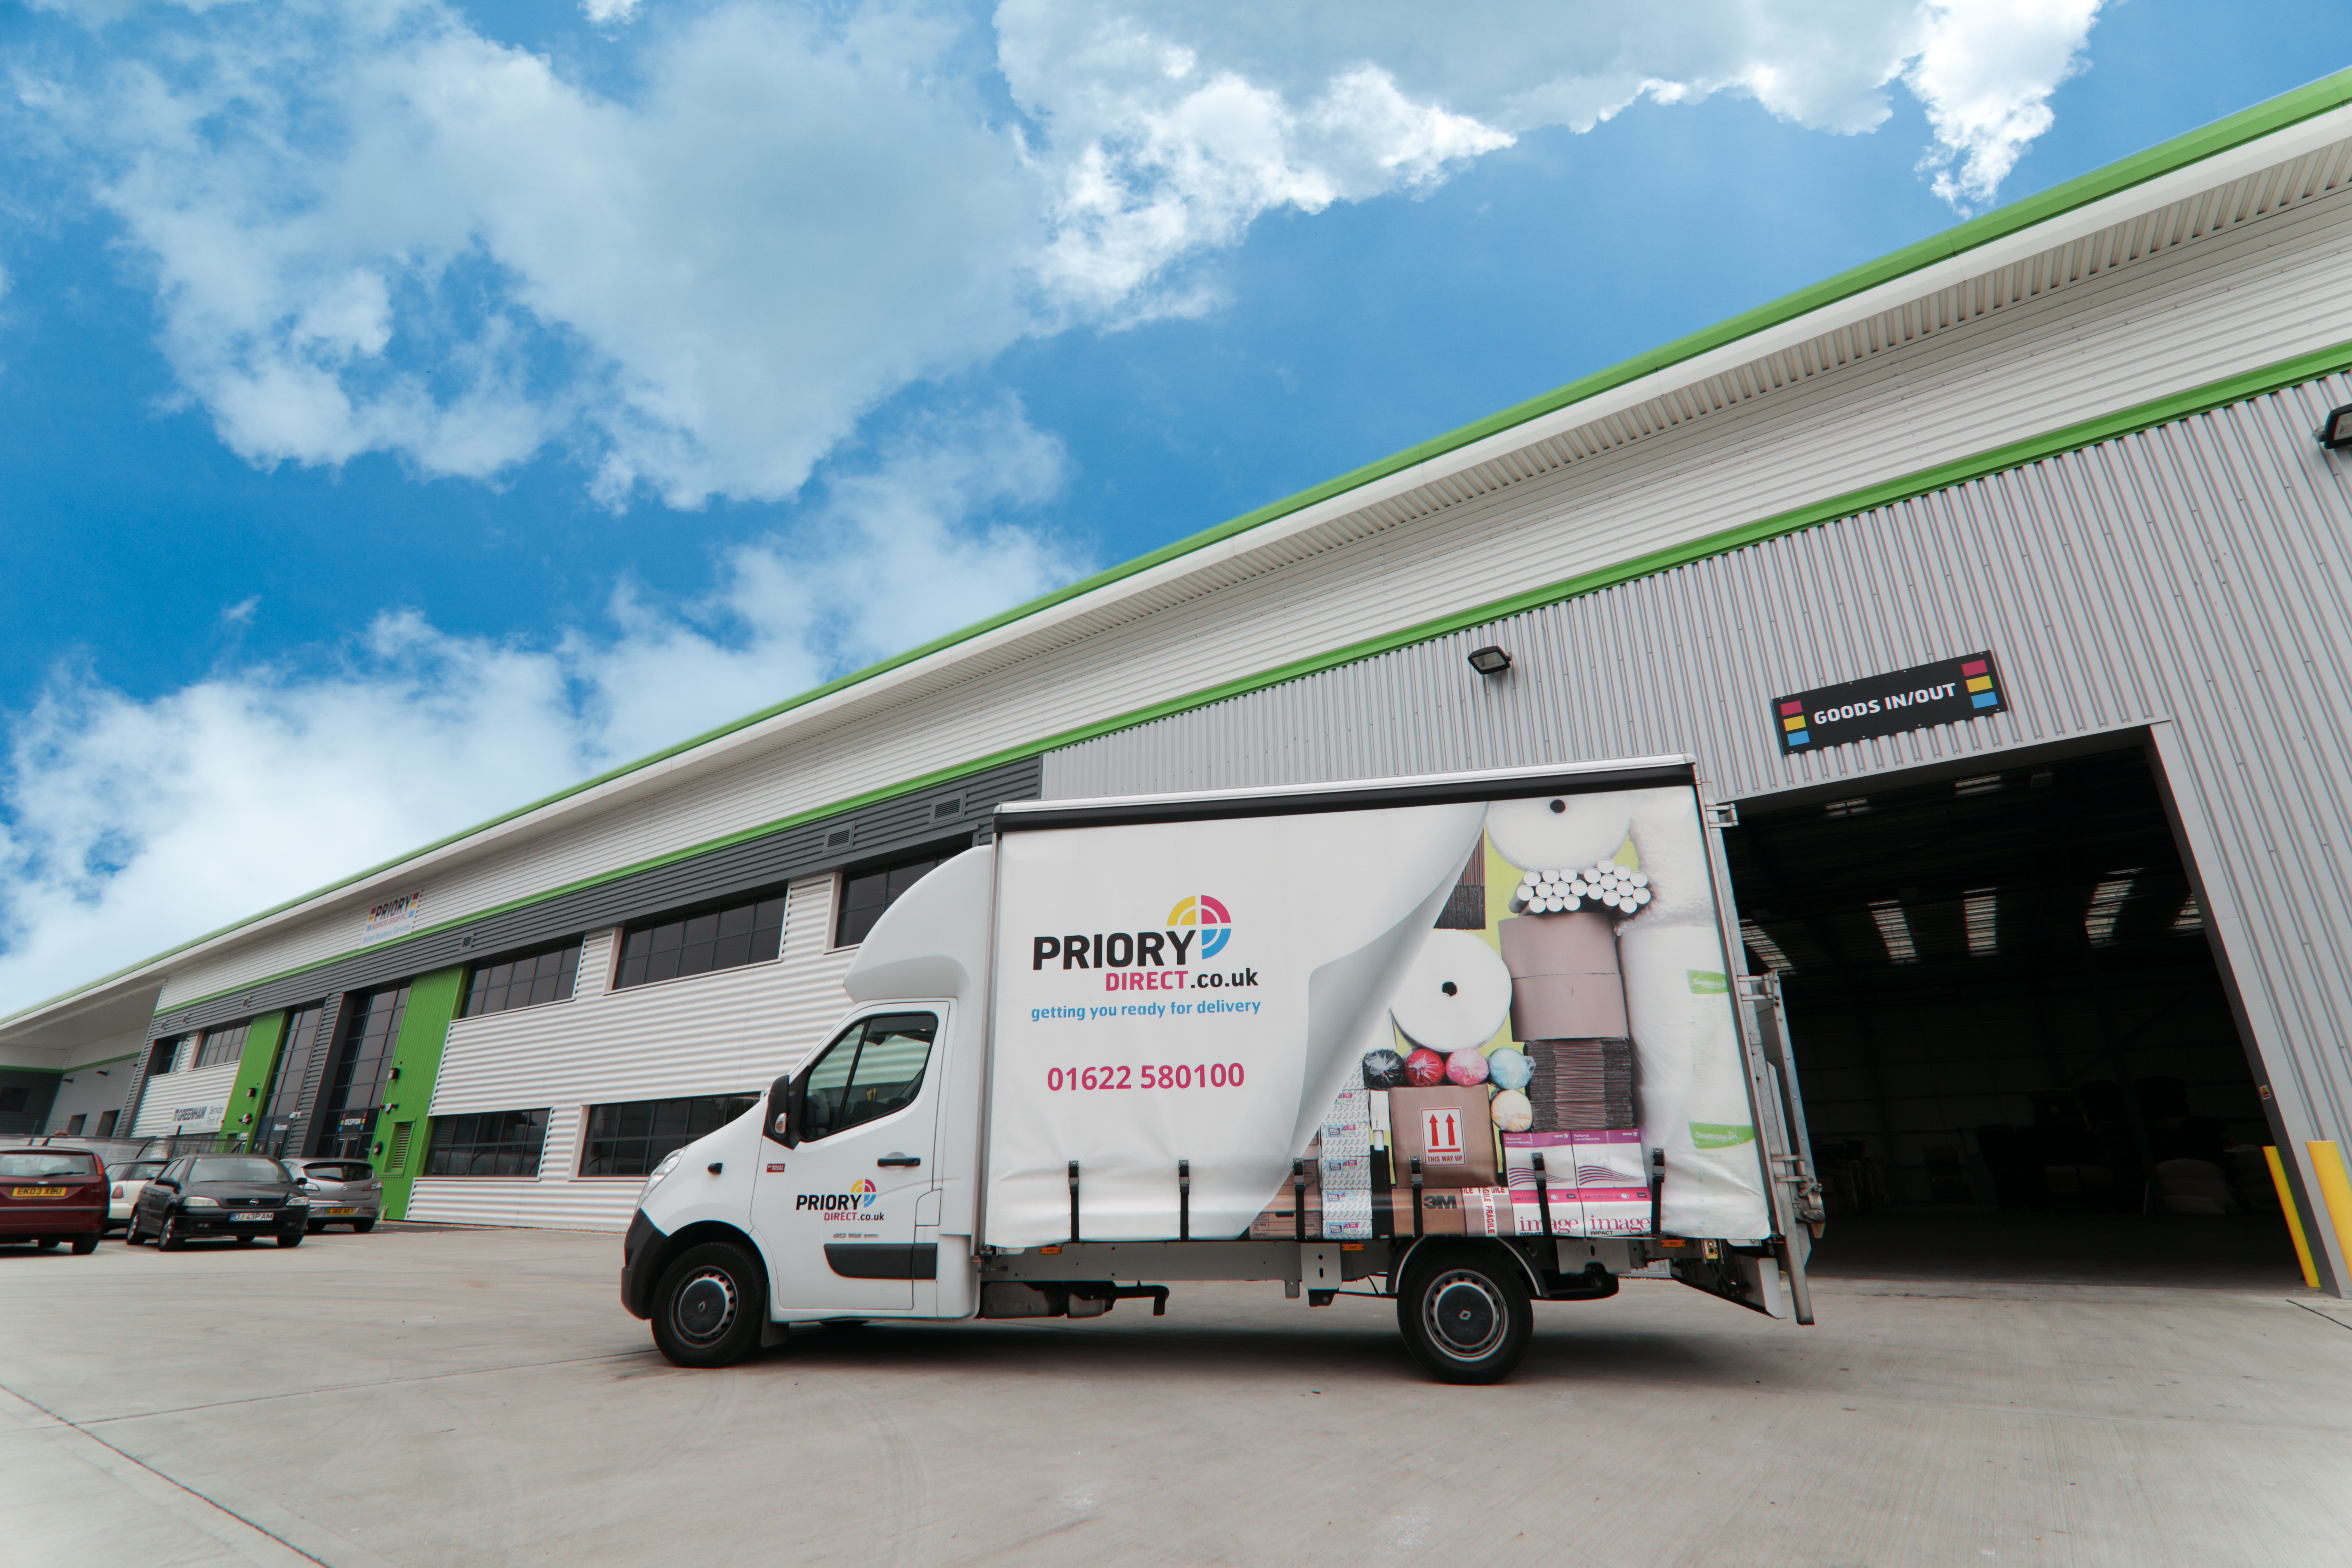 A priory direct van outside their Larkfield HQ